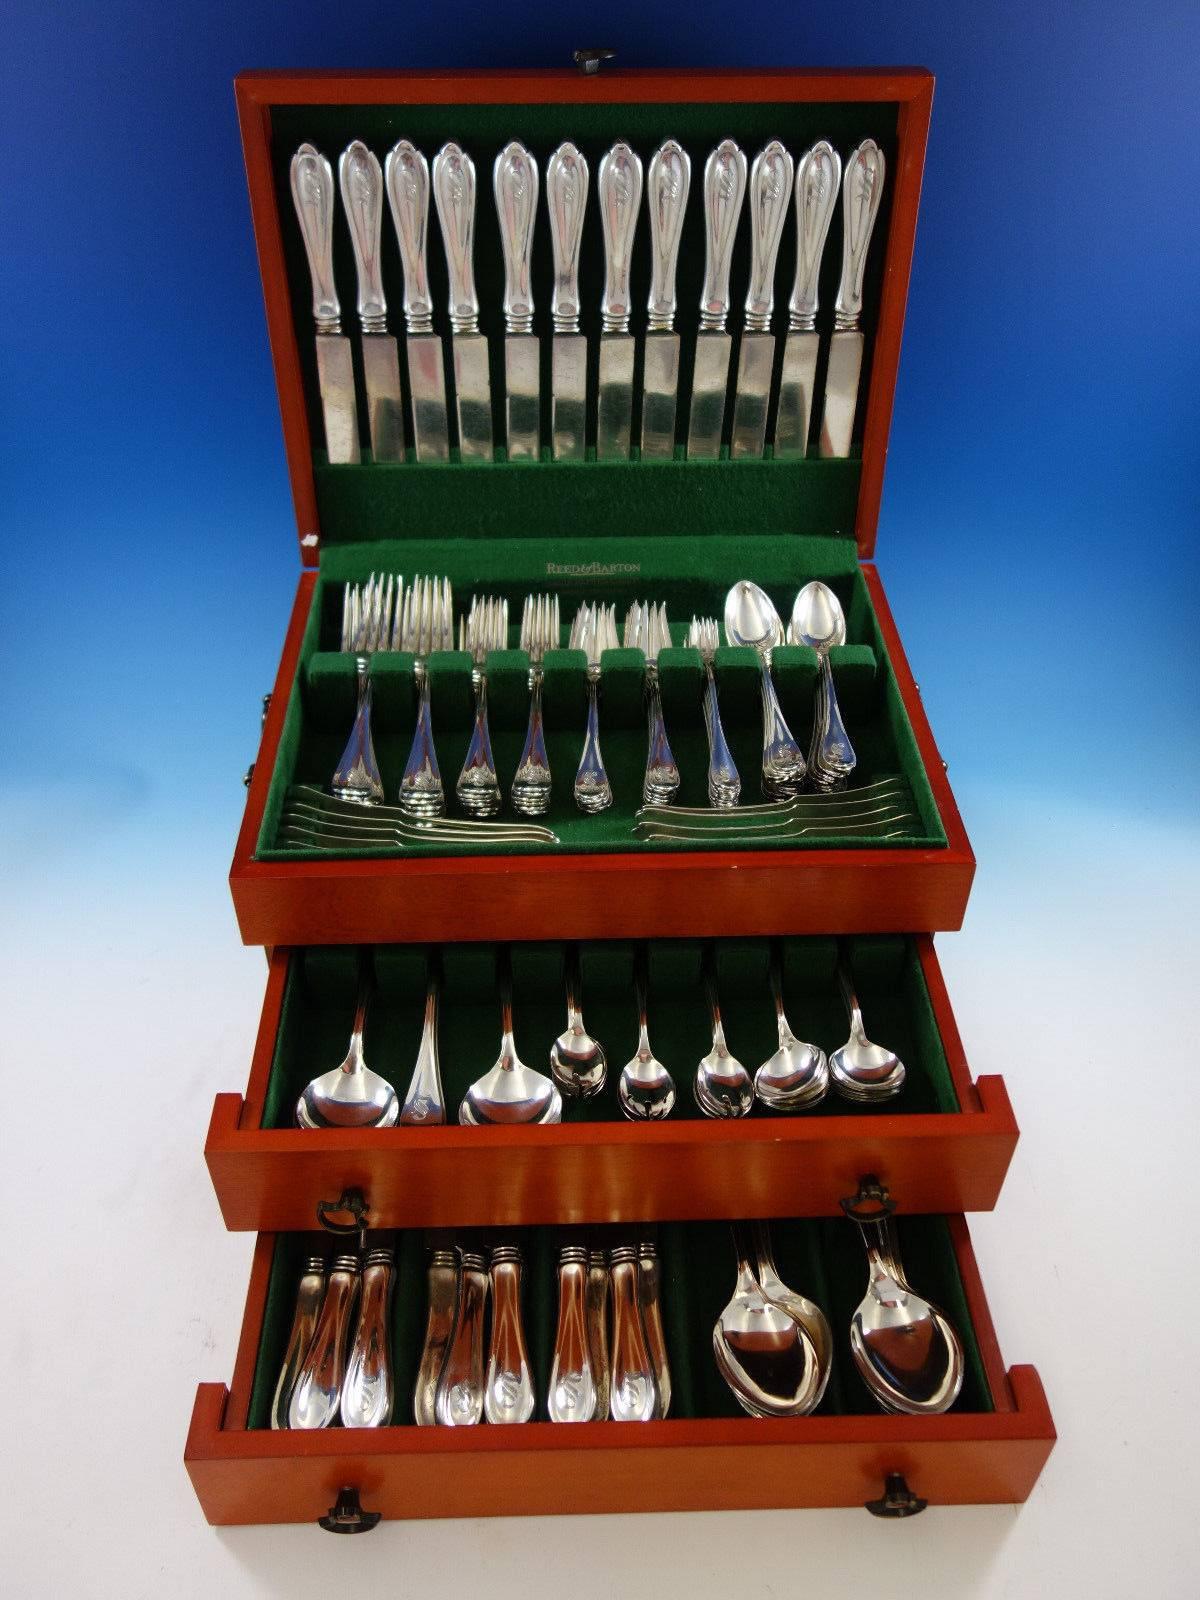 Rare Springfield by Unger Bros, circa 1900 sterling silver dinner and luncheon flatware set of 156 pieces. Matching 